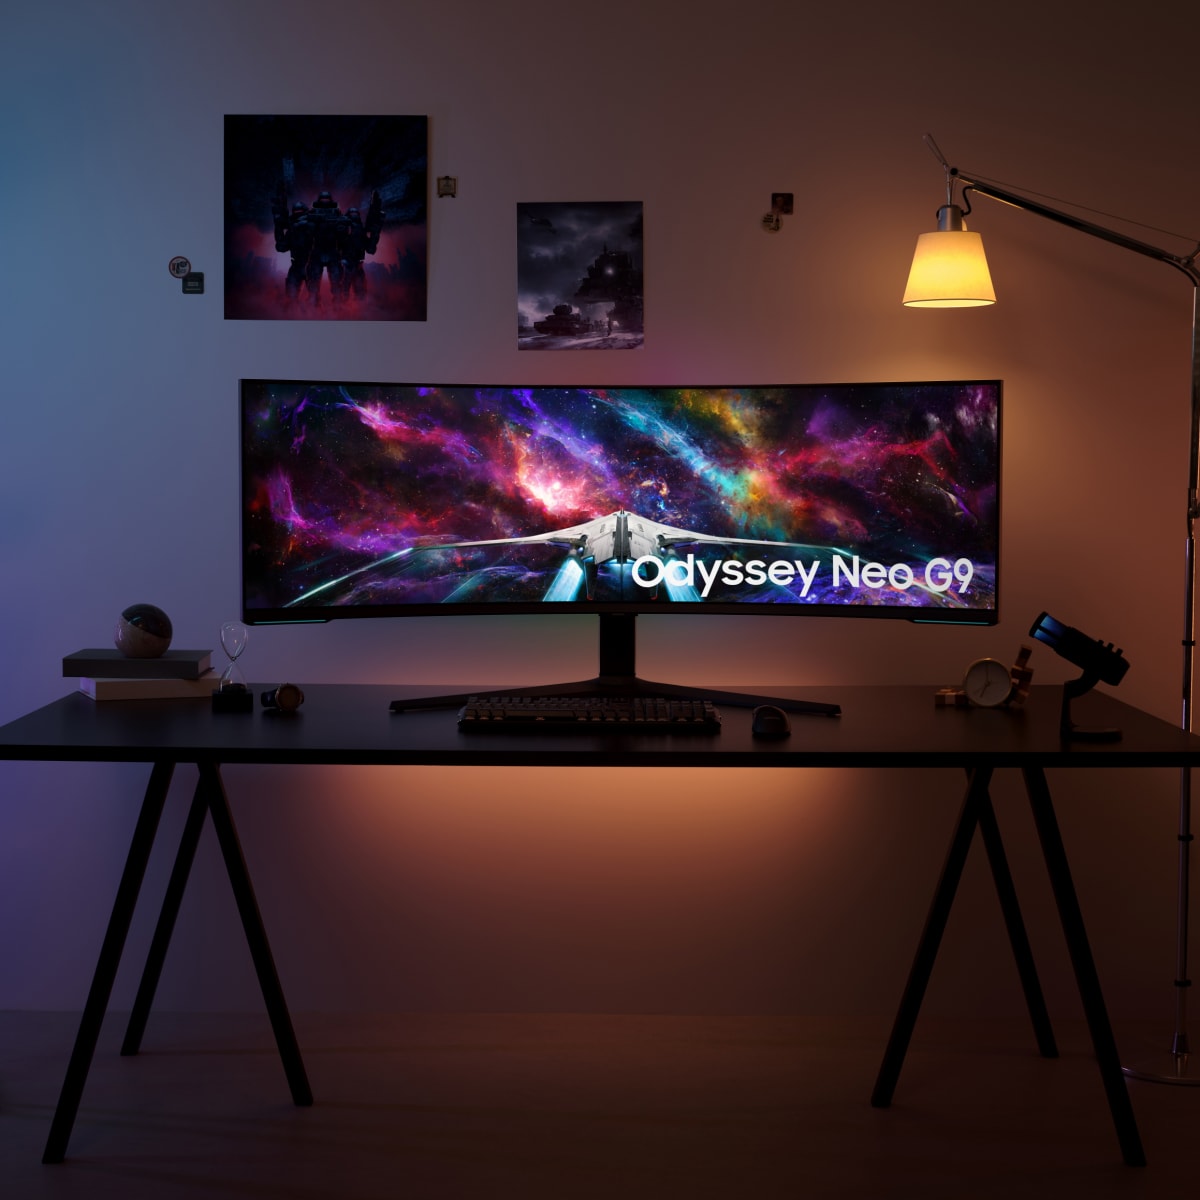 Samsung unveils 57-inch Odyssey Neo G9 curved displays for more